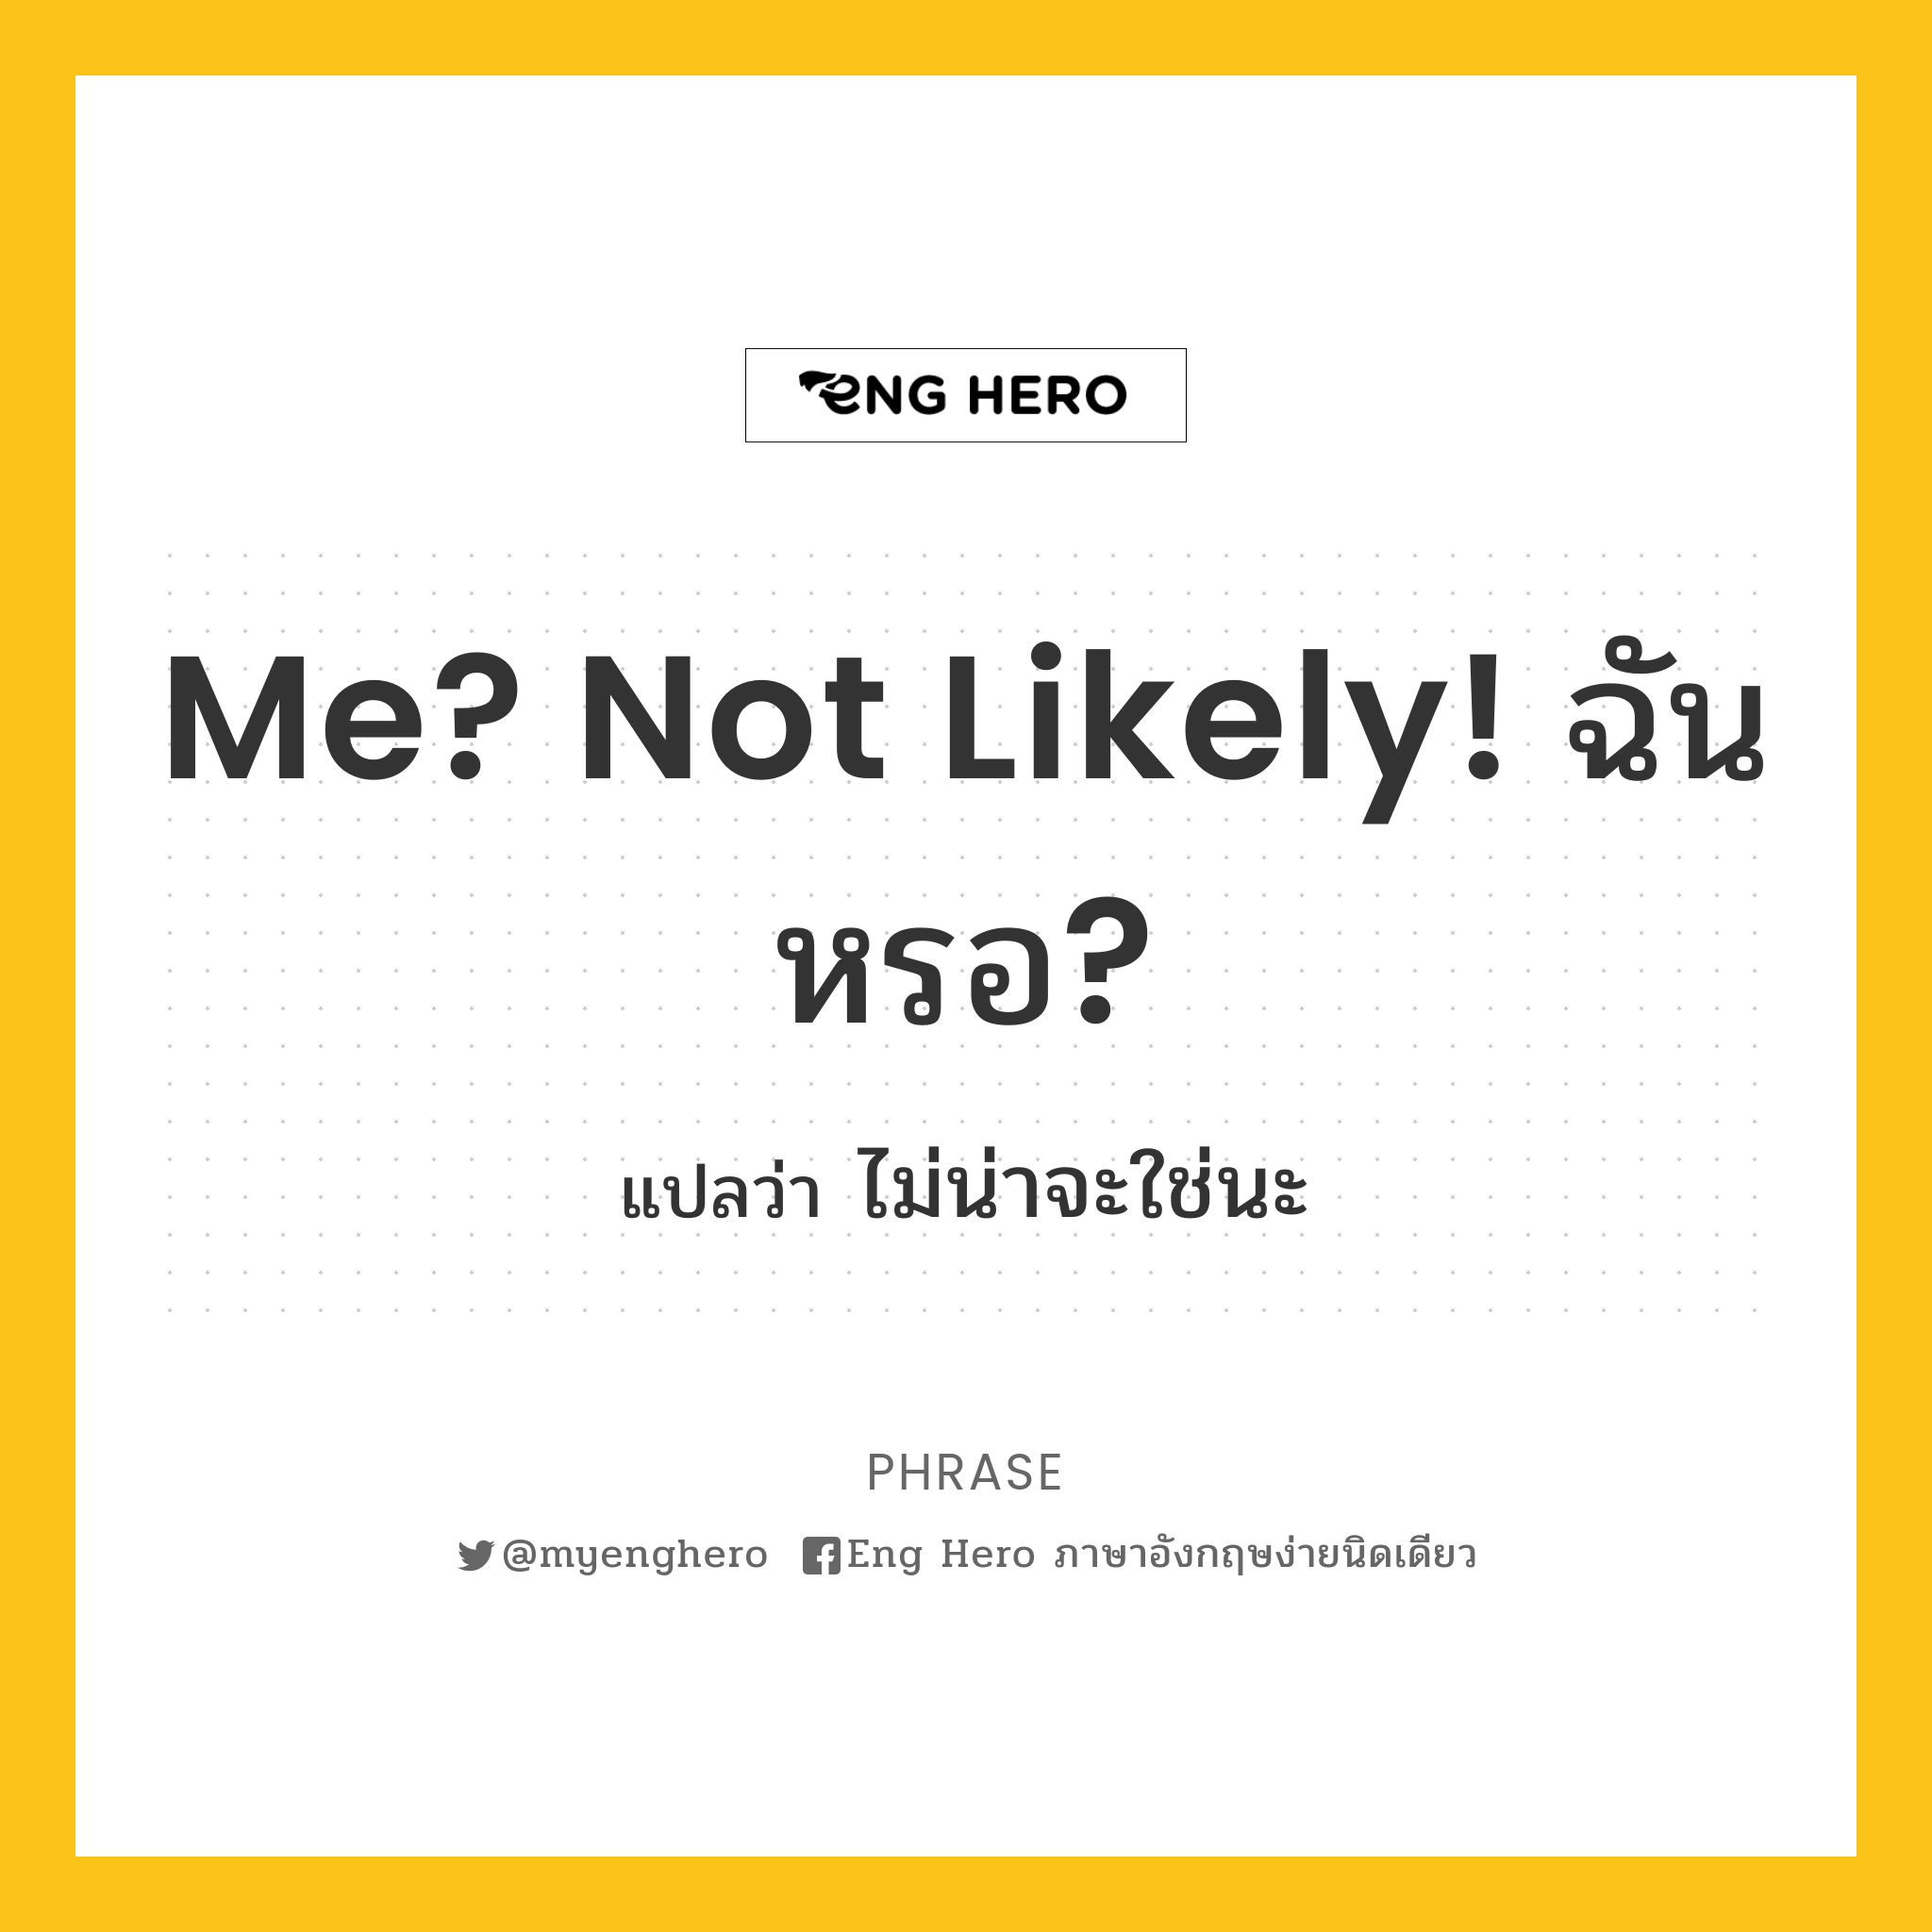 Me? Not likely! ฉันหรอ?